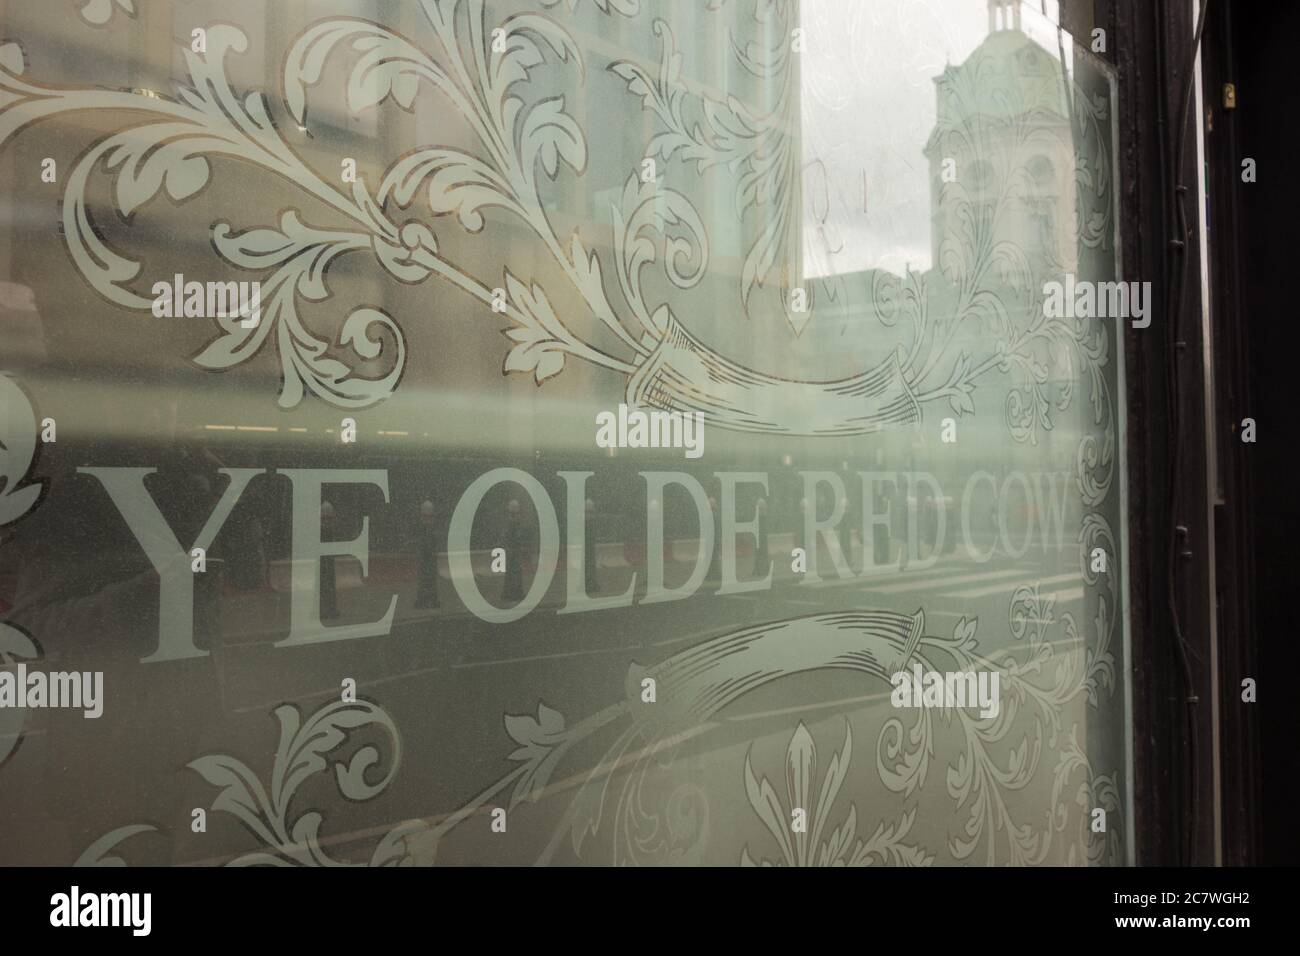 Closeup of the frosted glass window of the Ye Olde Red Cow public house in Smithfield, London, UK Stock Photo